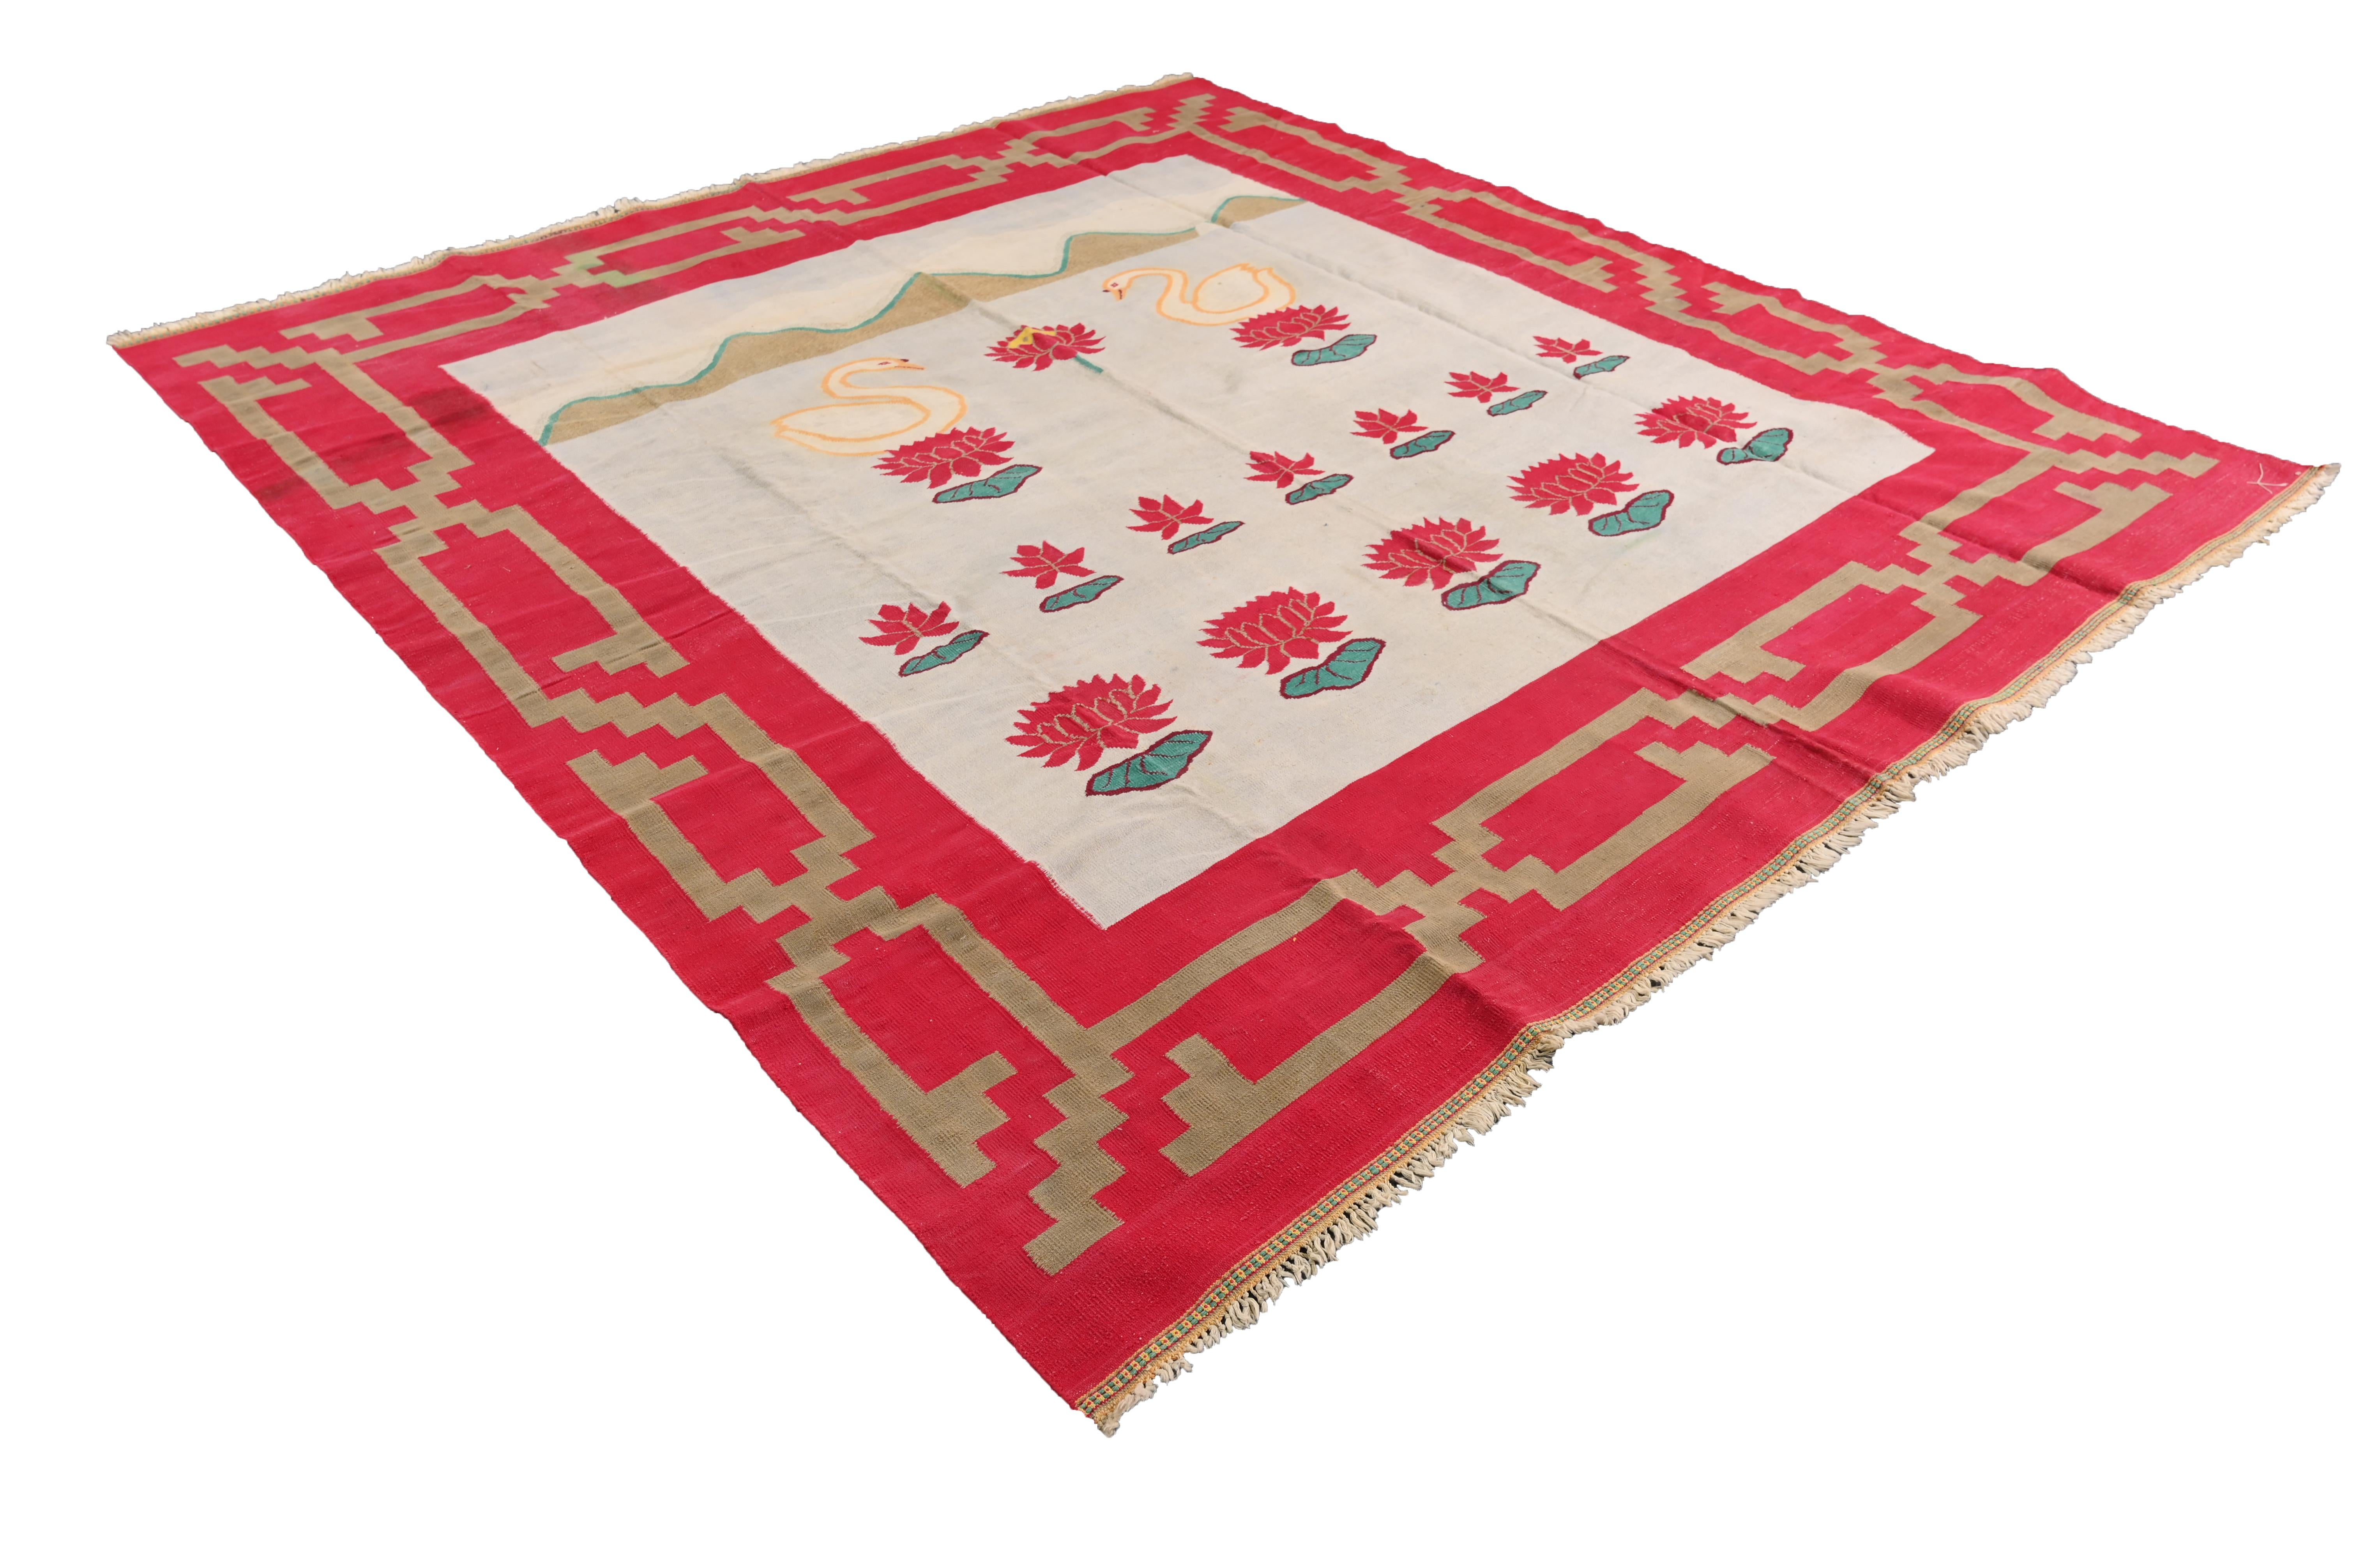 Indian Vintage Dhurrie Flat Weave in Red and Blue with Swan Pictorials by Rug & Kilim For Sale